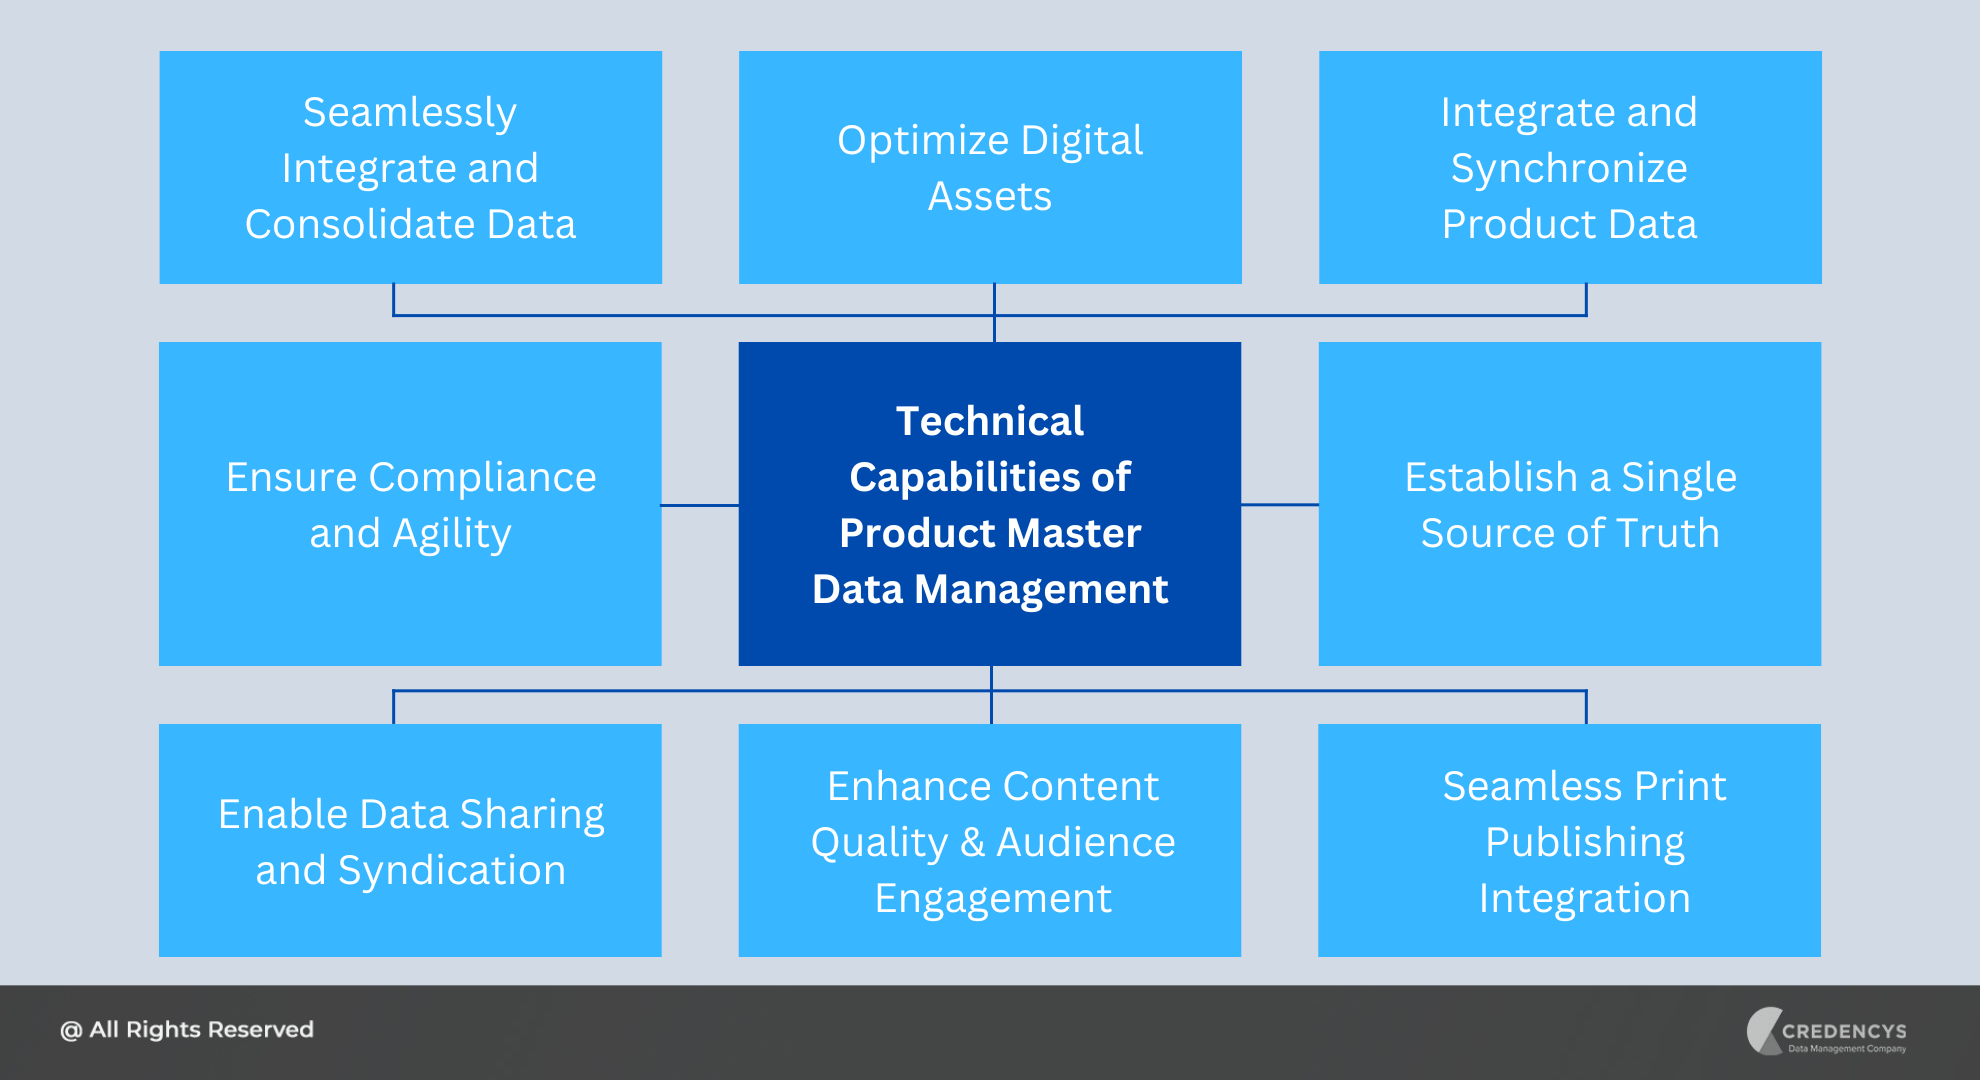 Technical Capabilities of Product Master Data Management